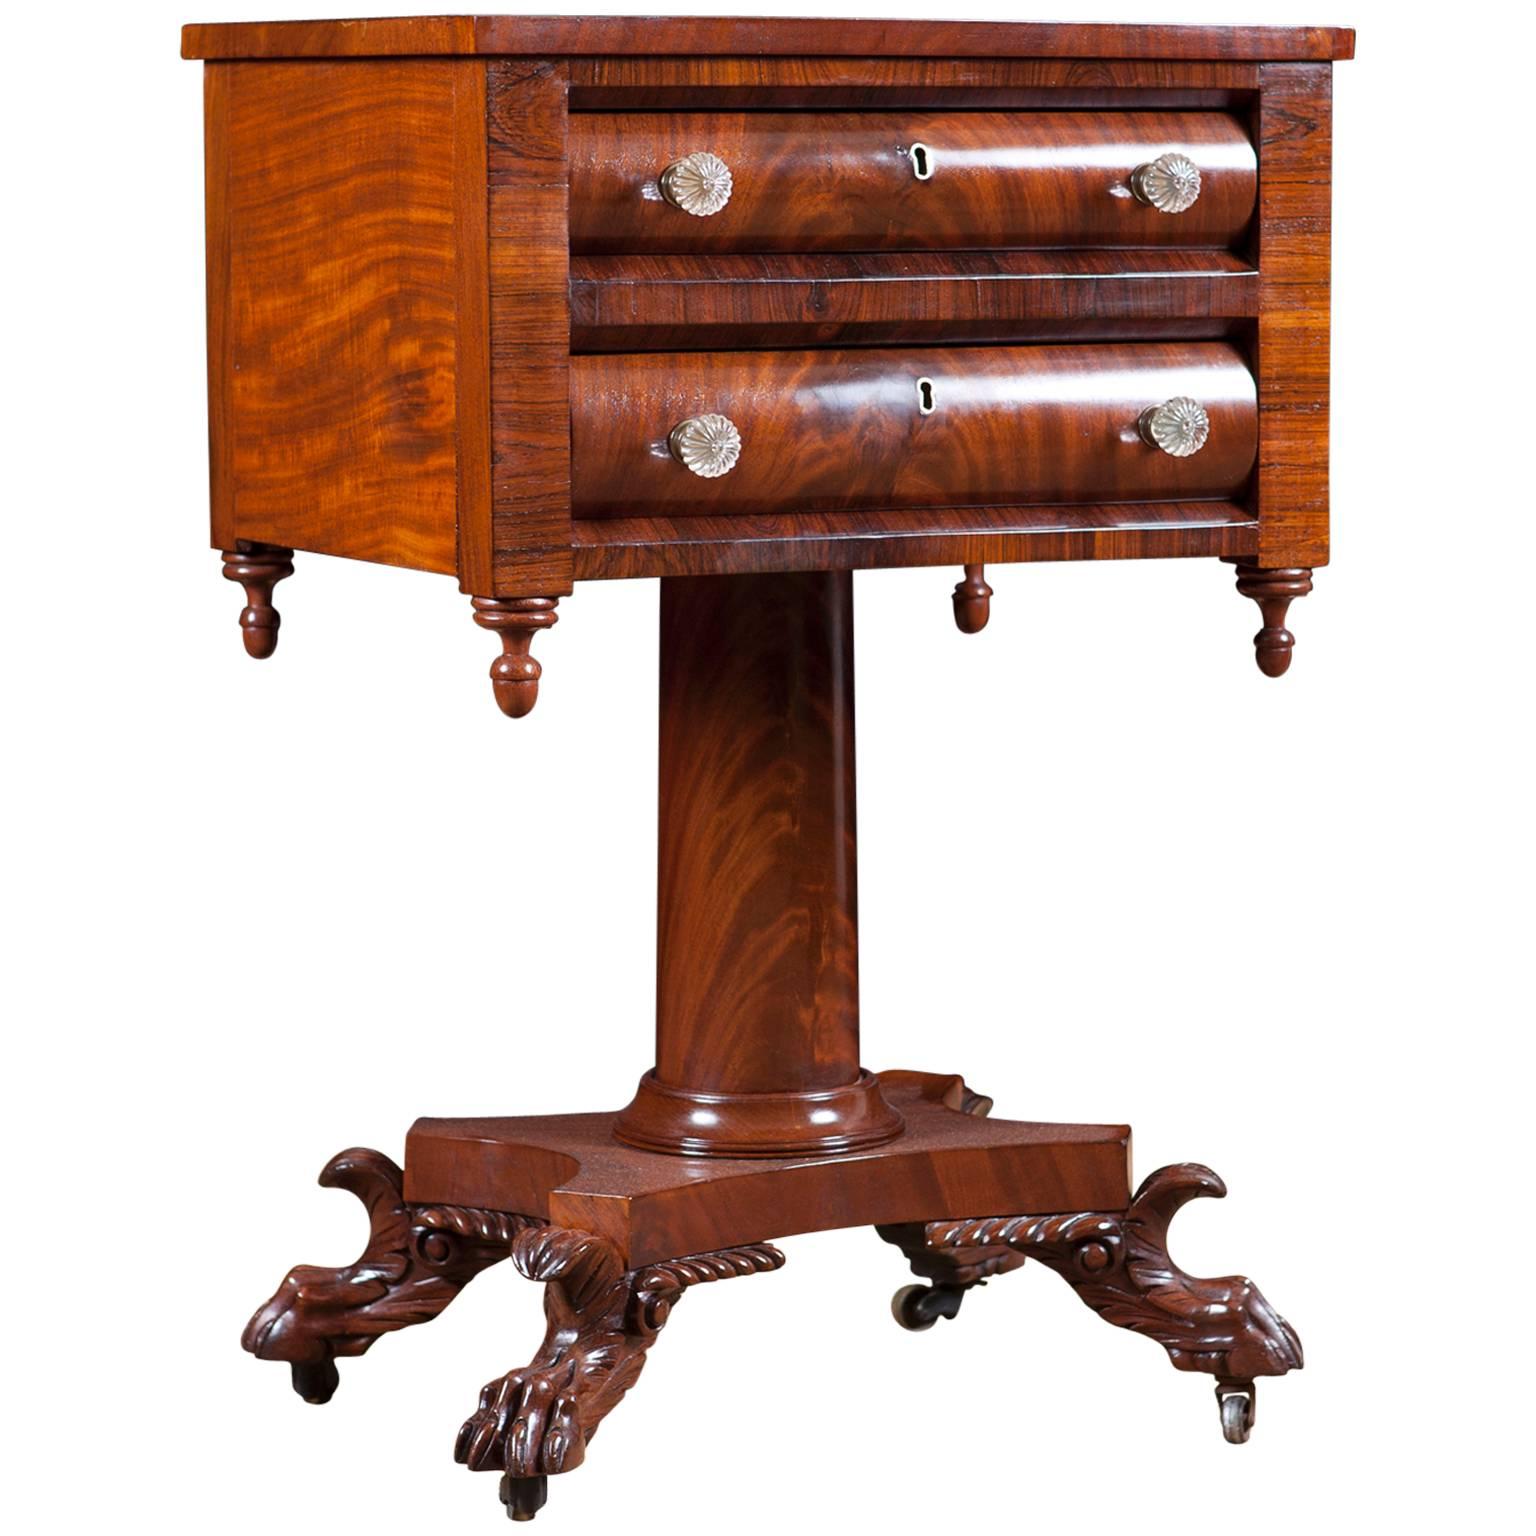 Neoclassical American Empire Side or Lamp Table in Mahogany, circa 1820 For Sale